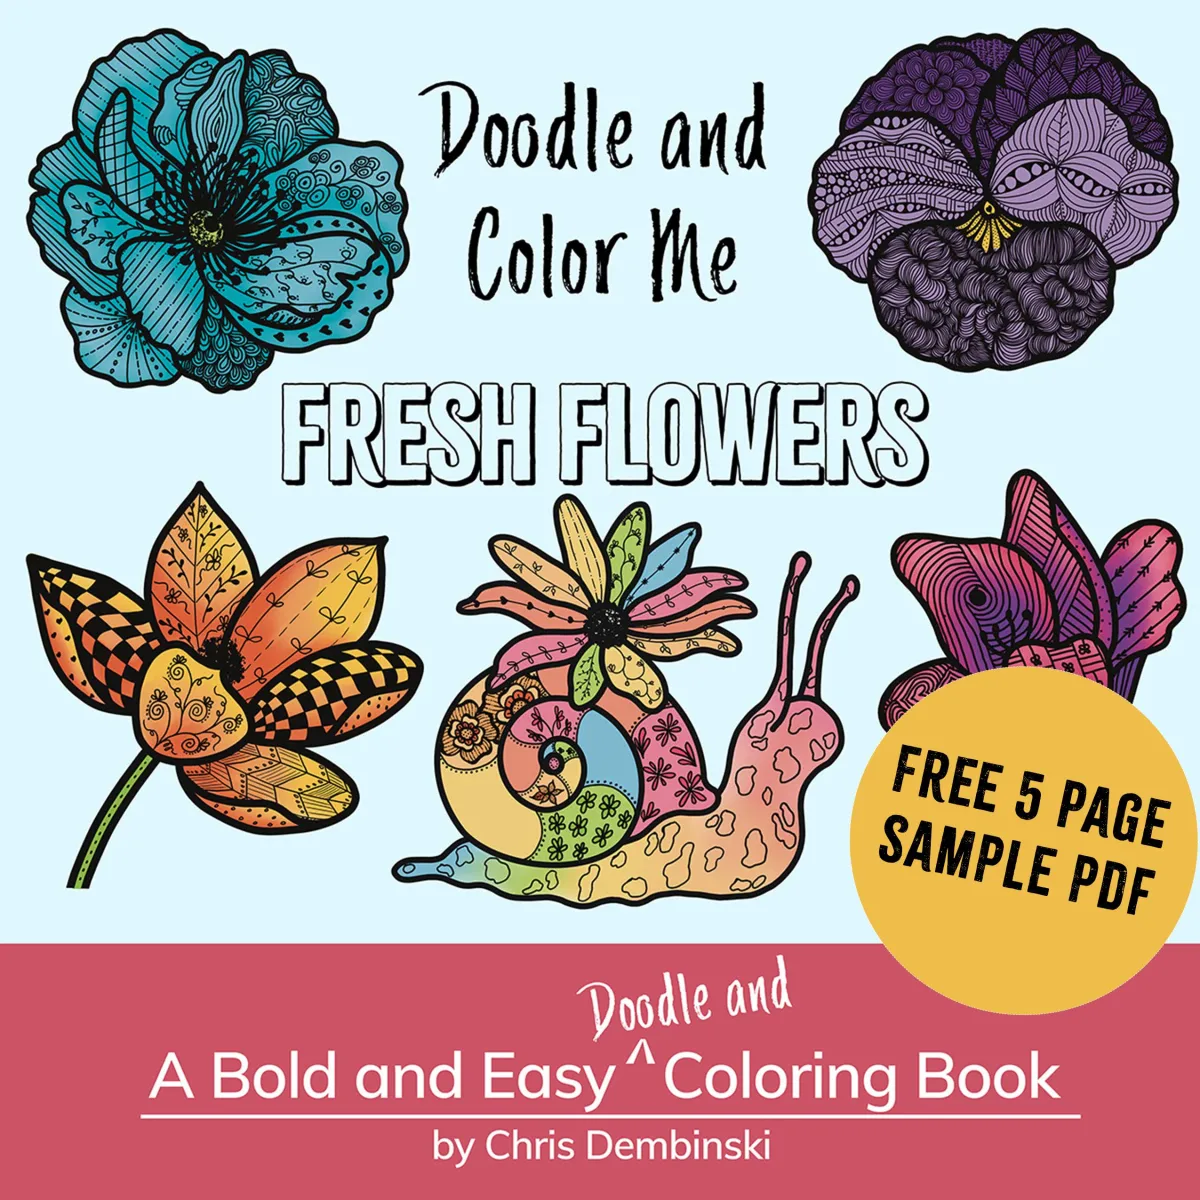 Free 5 page Doodle and Color Me Sample pd